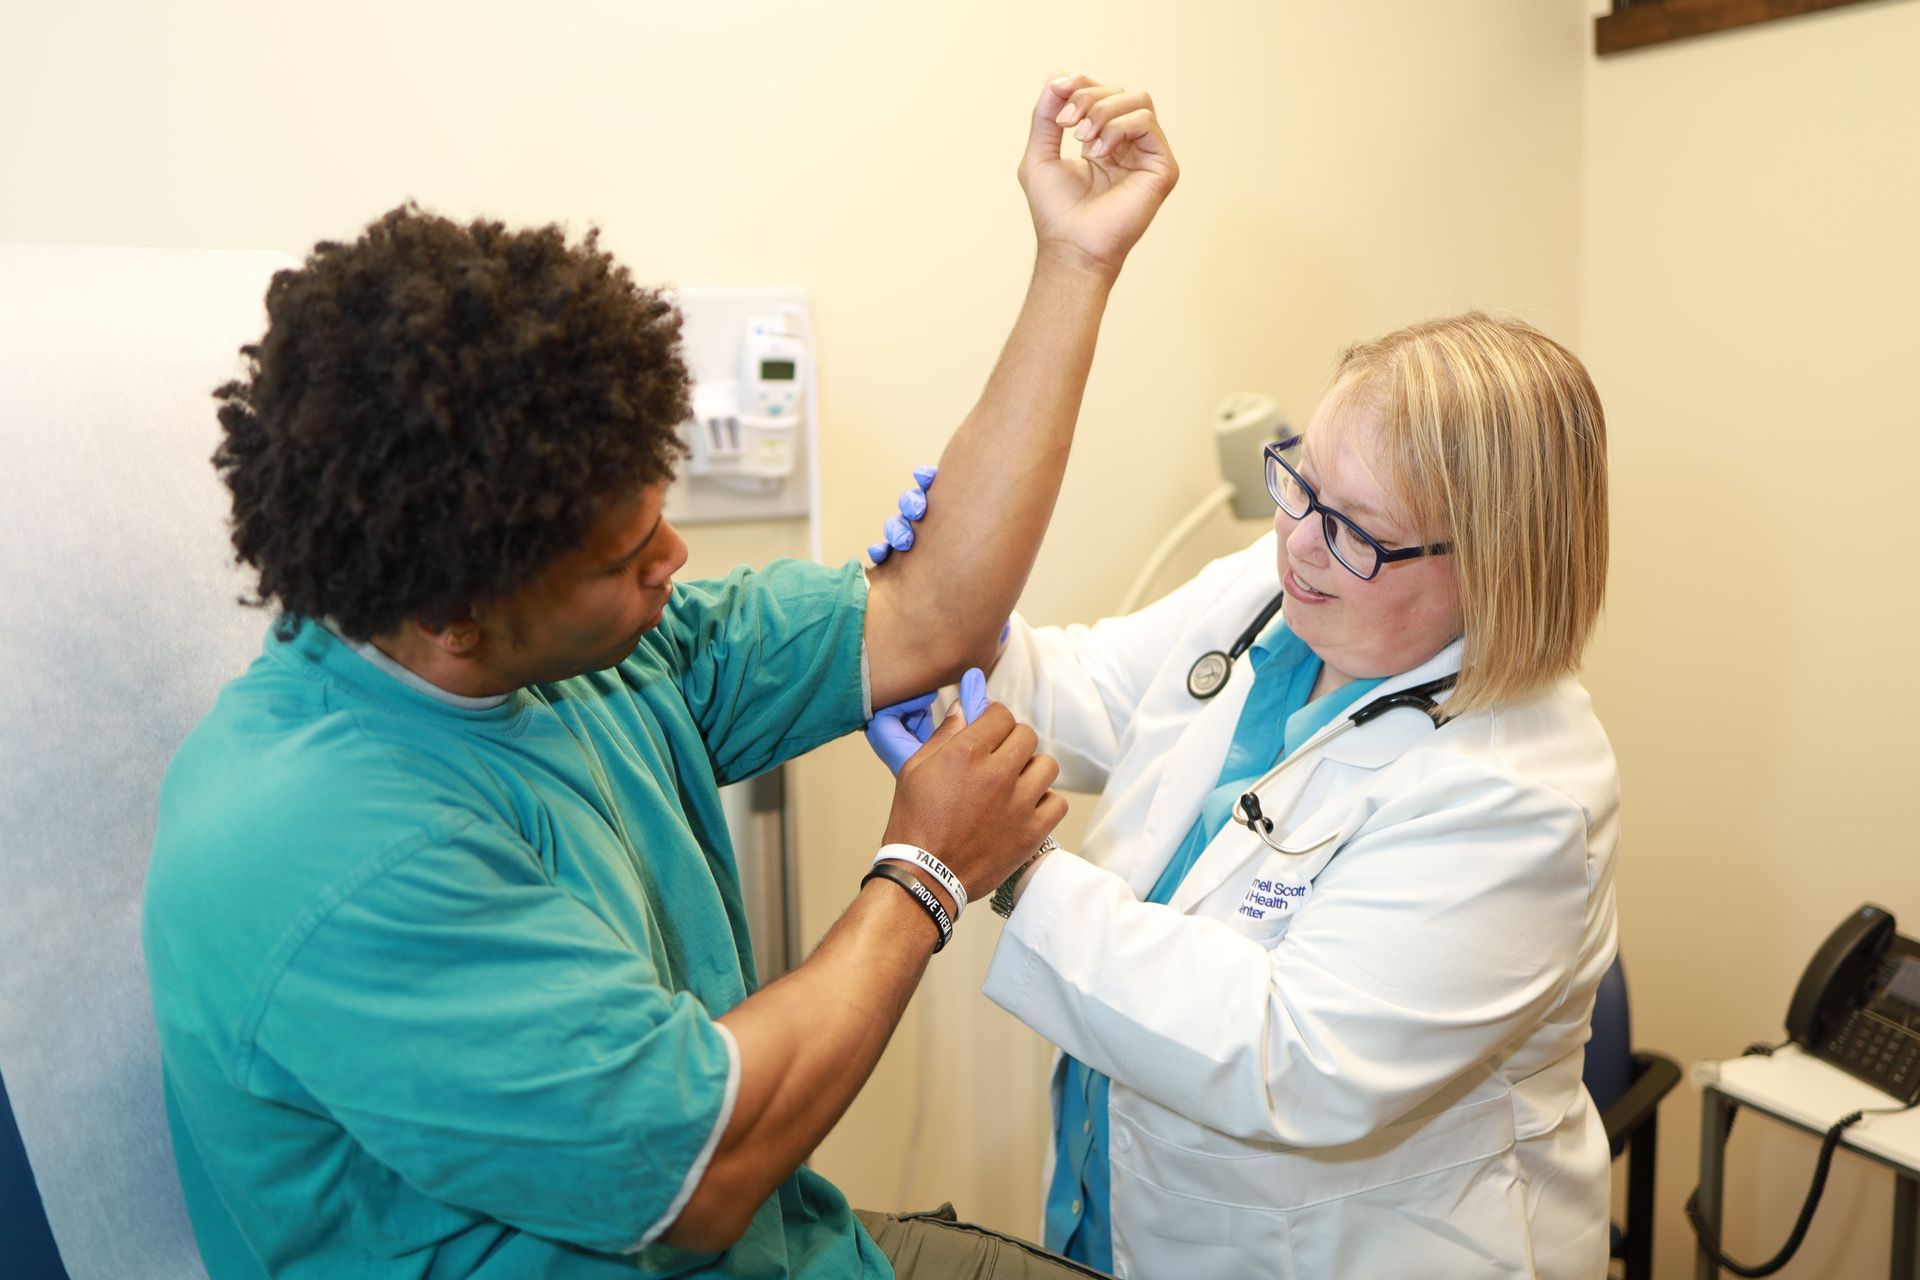 An image of a female doctor examining the elbow of a male patient